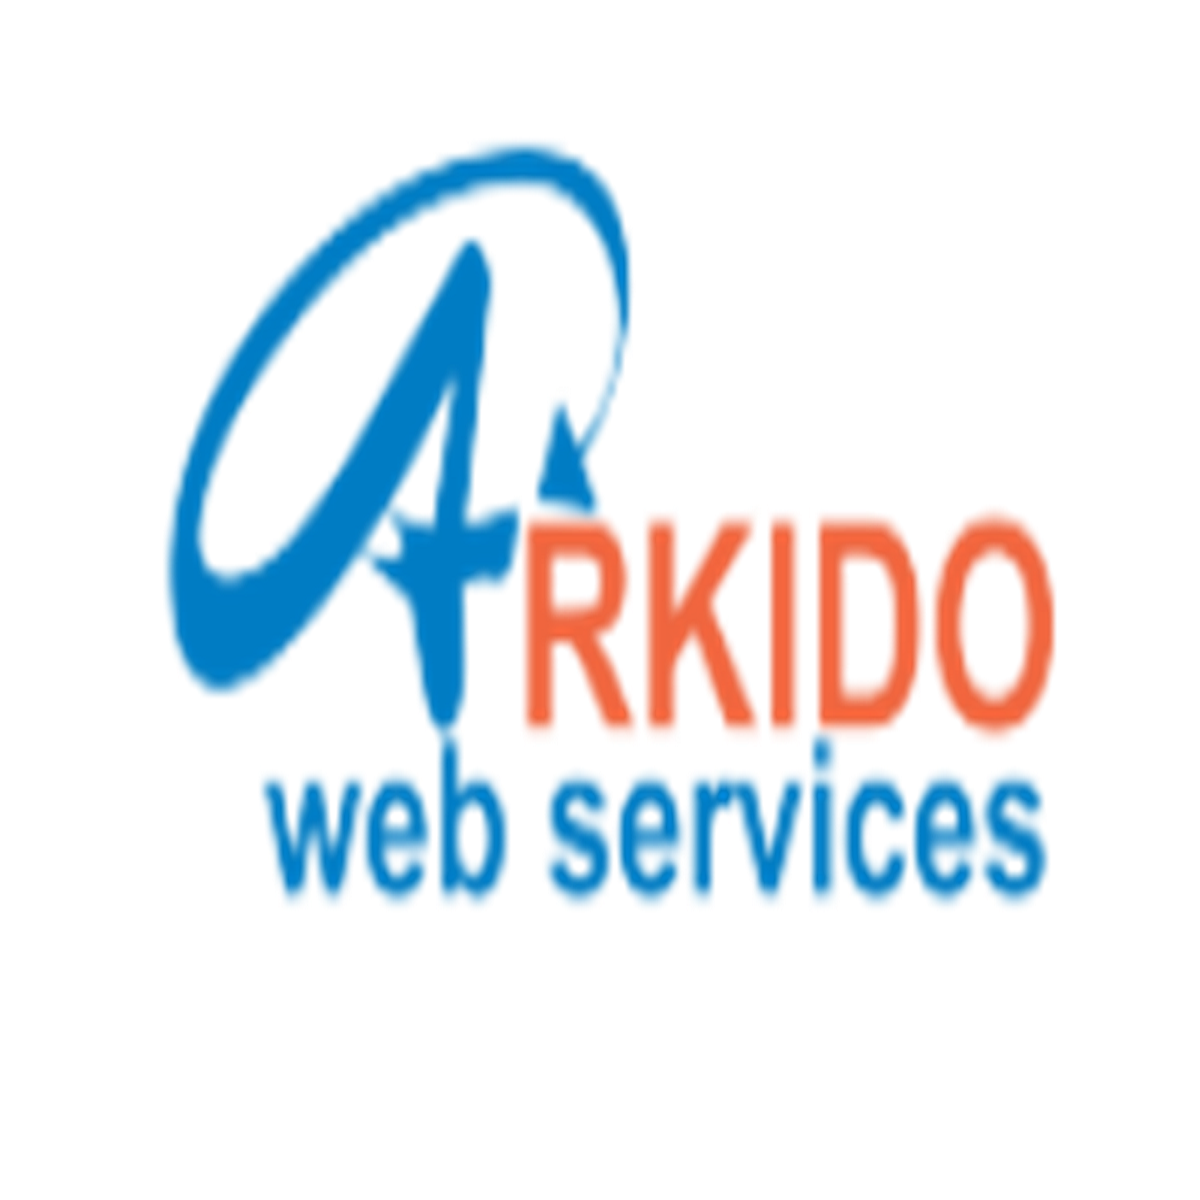 Arkido Web Services